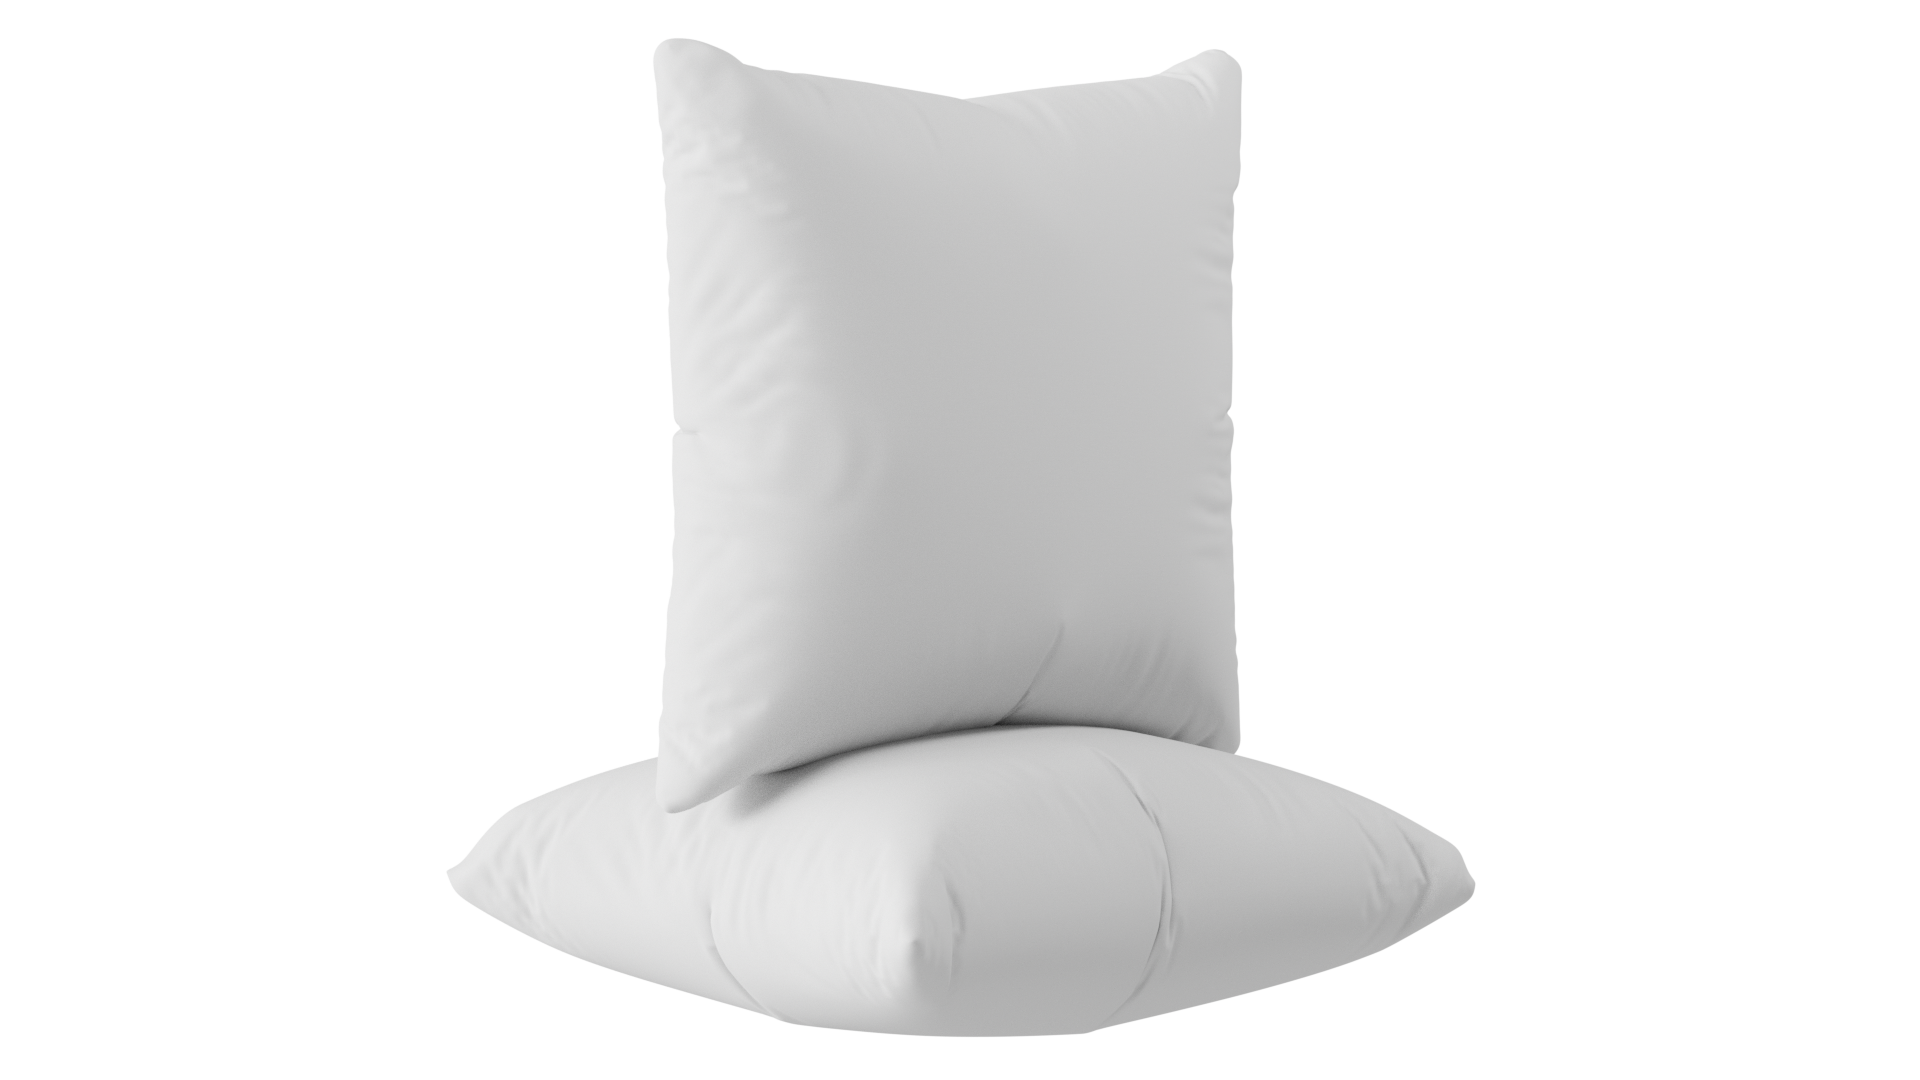  Utopia Bedding Throw Pillow Inserts (Pack of 4, White), 12 x 20  Inches Decorative Indoor Pillows for Sofa, Bed, Couch, Cushion Sham Stuffer  : Home & Kitchen